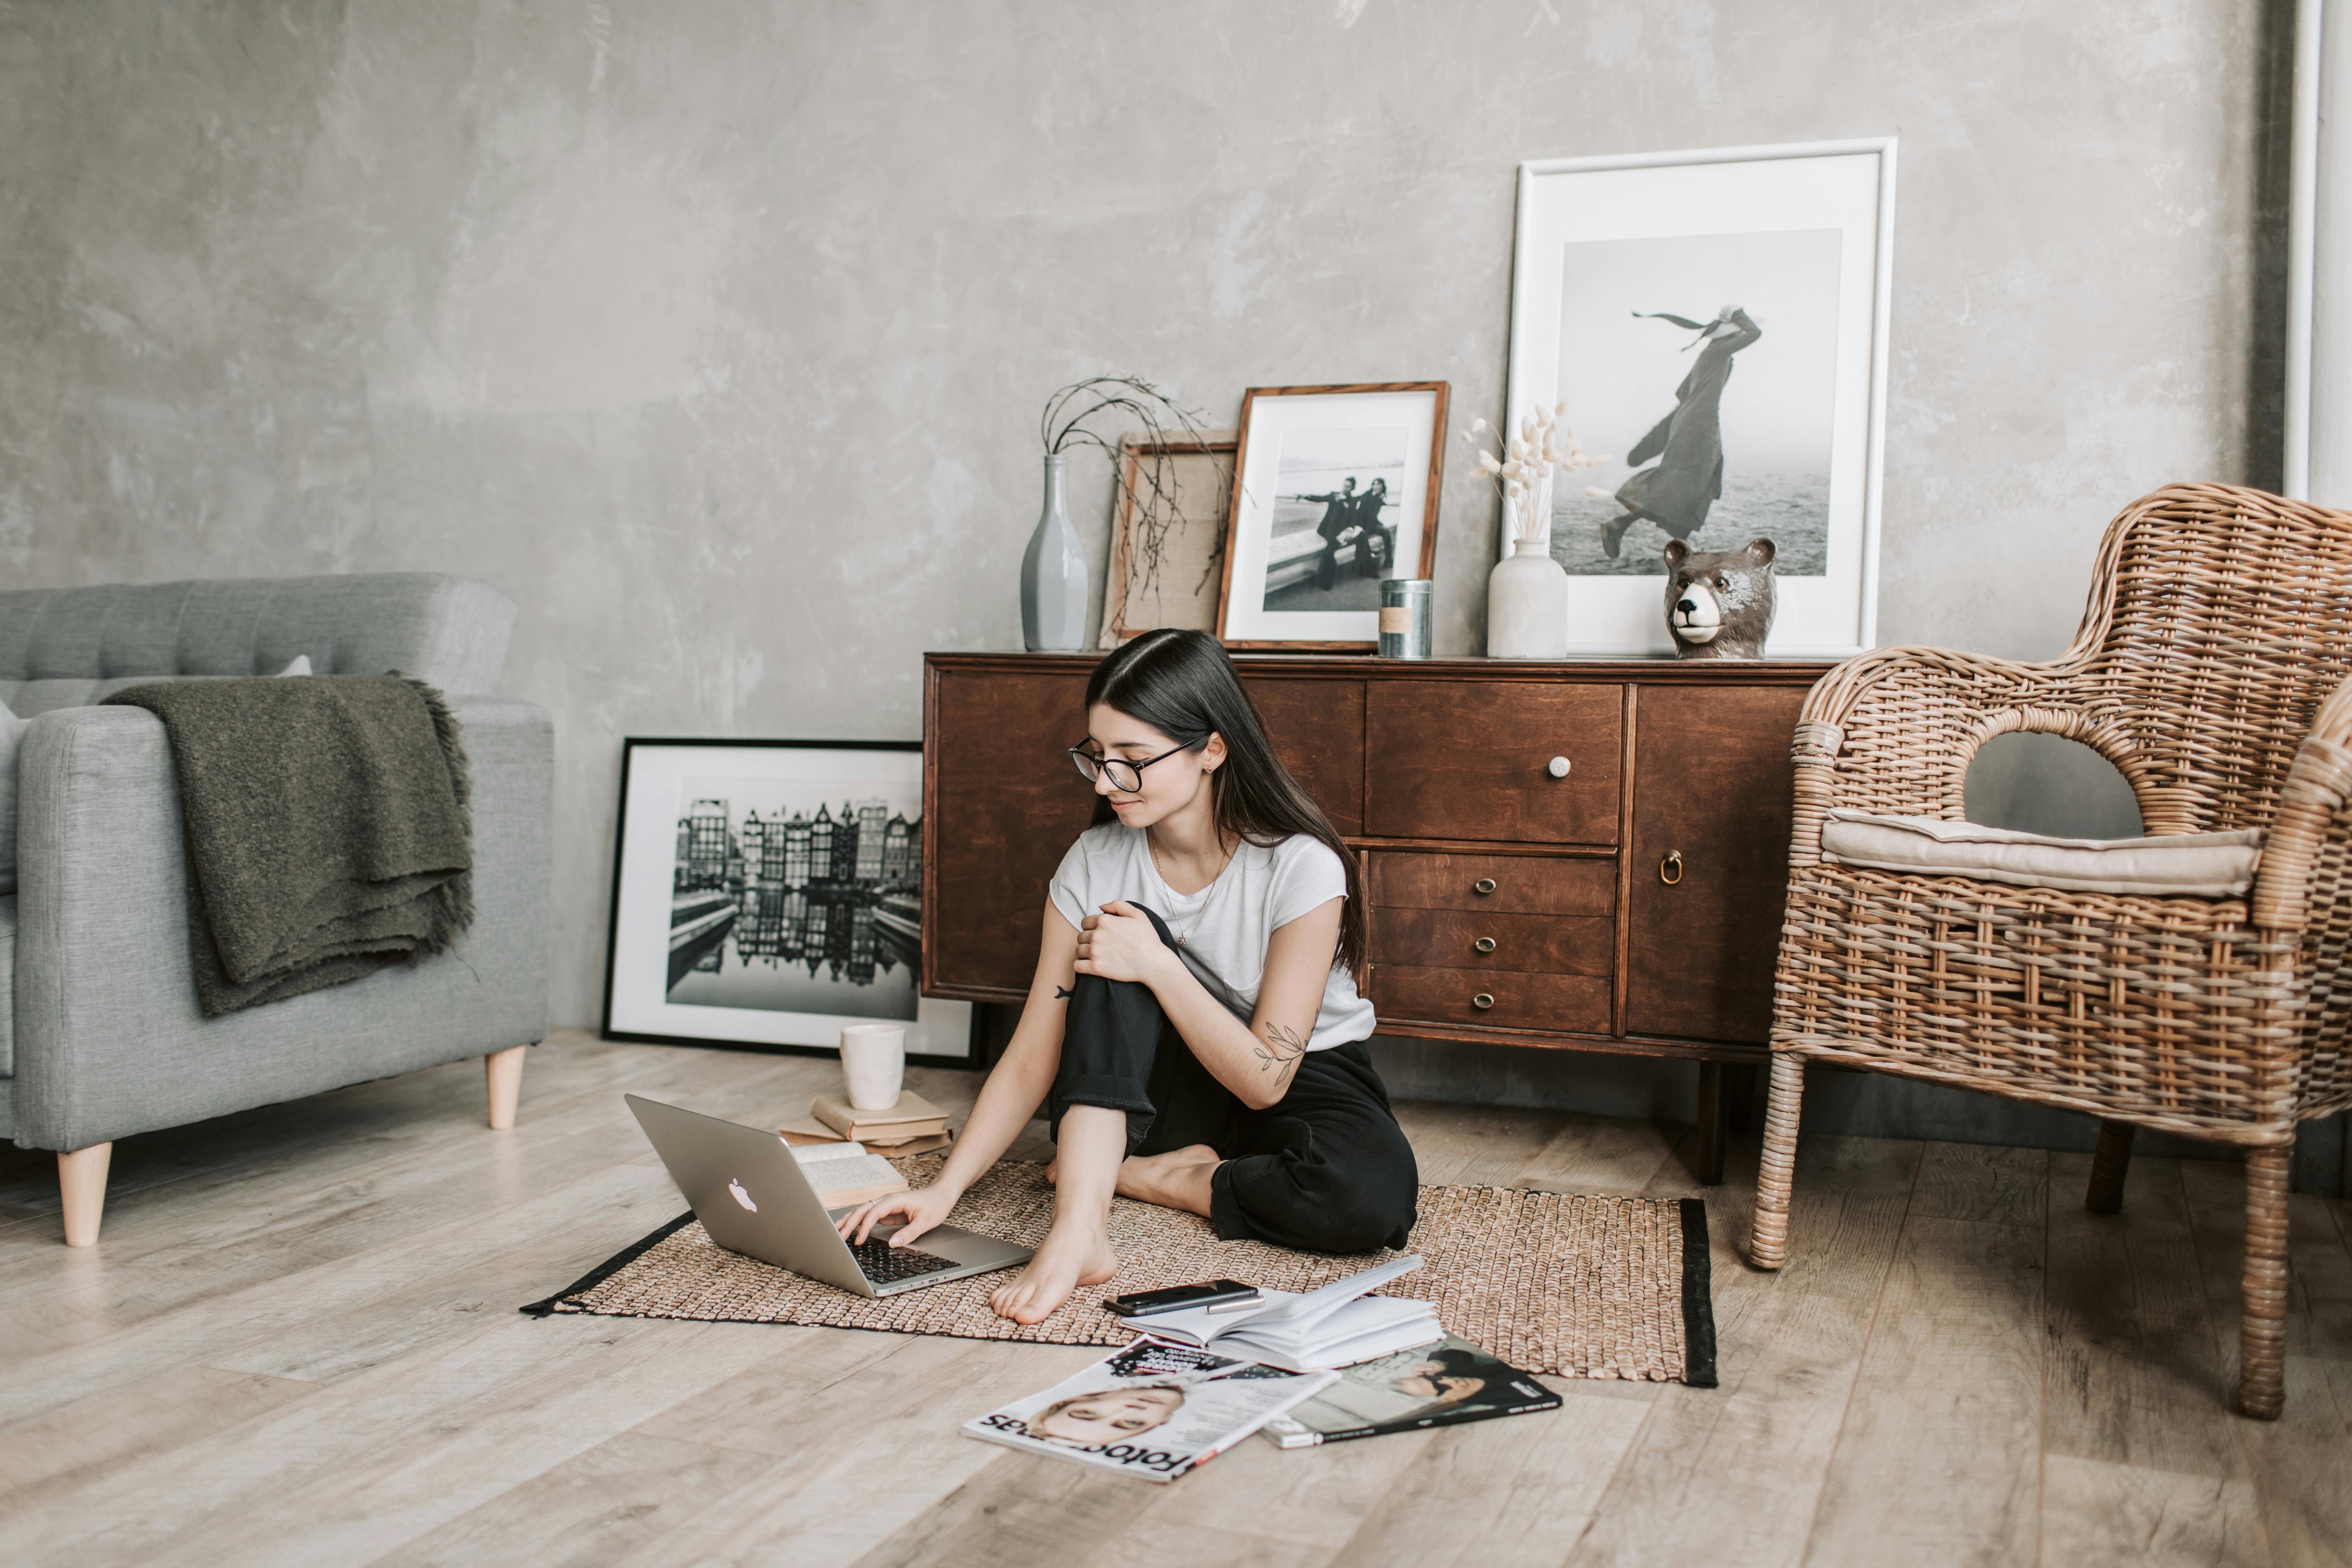 A young woman busy on a laptop | Source: Pexels